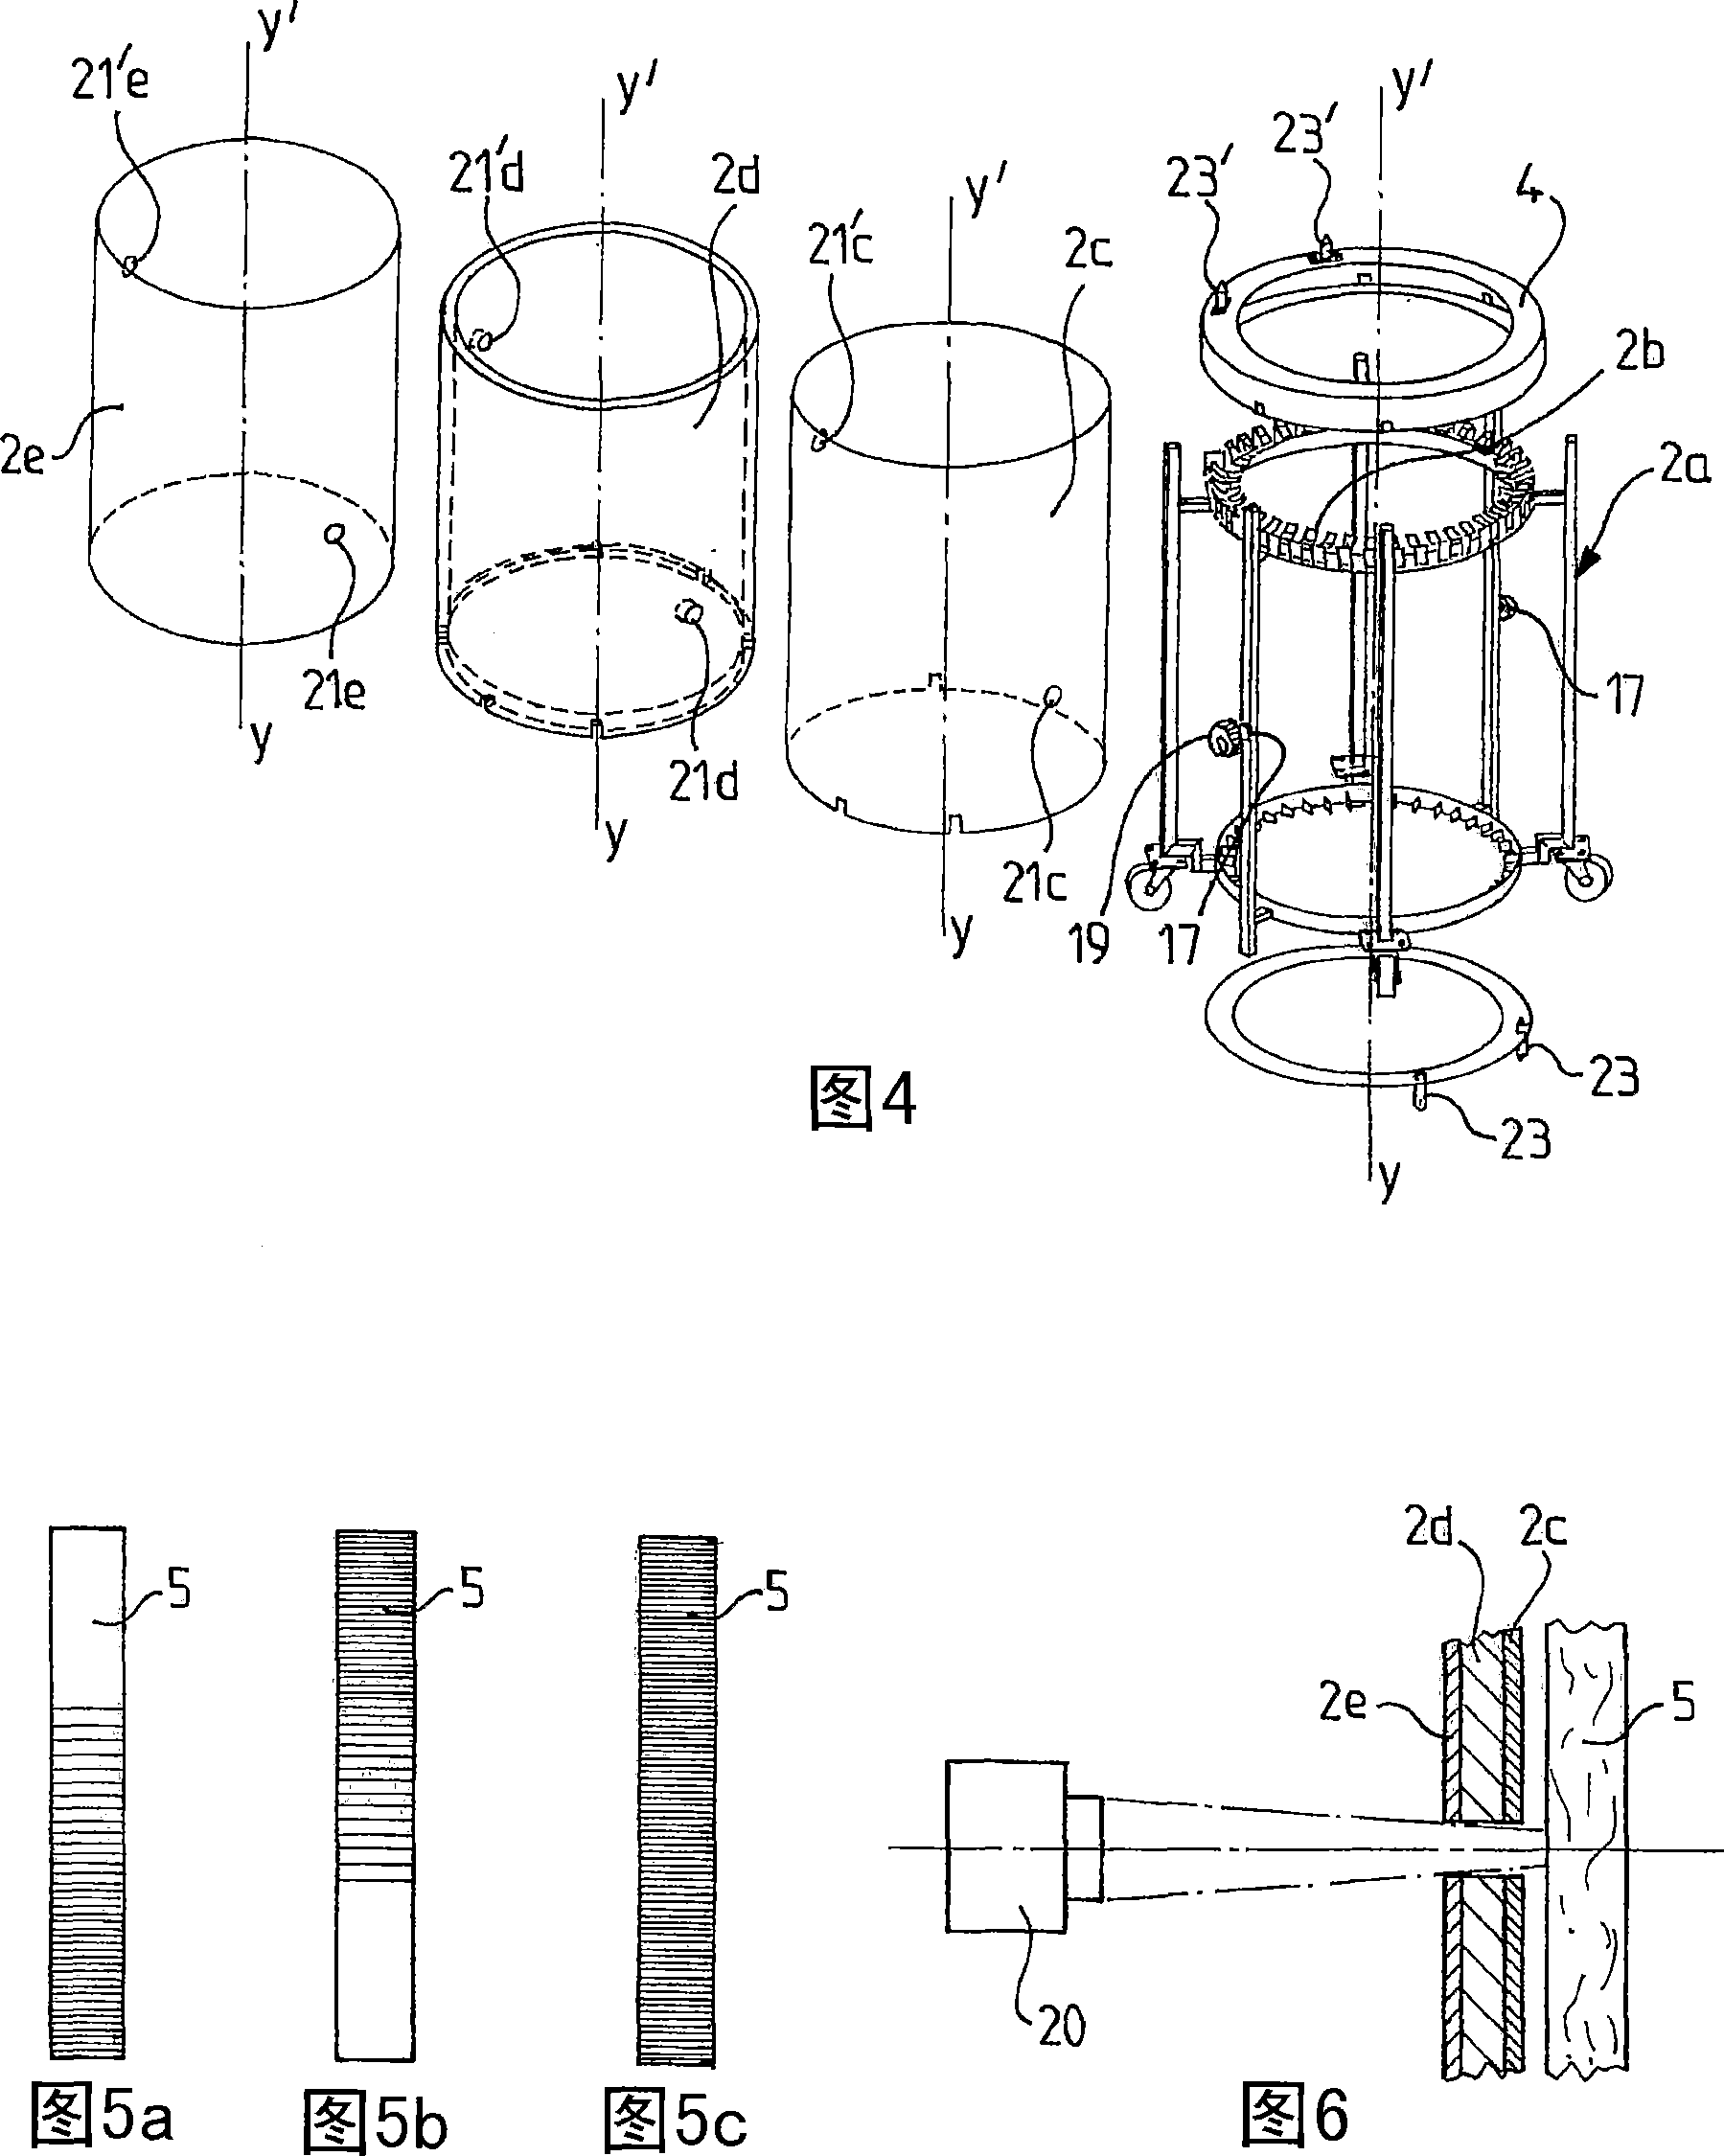 Method and device for heat treatment of wooden staves designed to form aromatic inserts